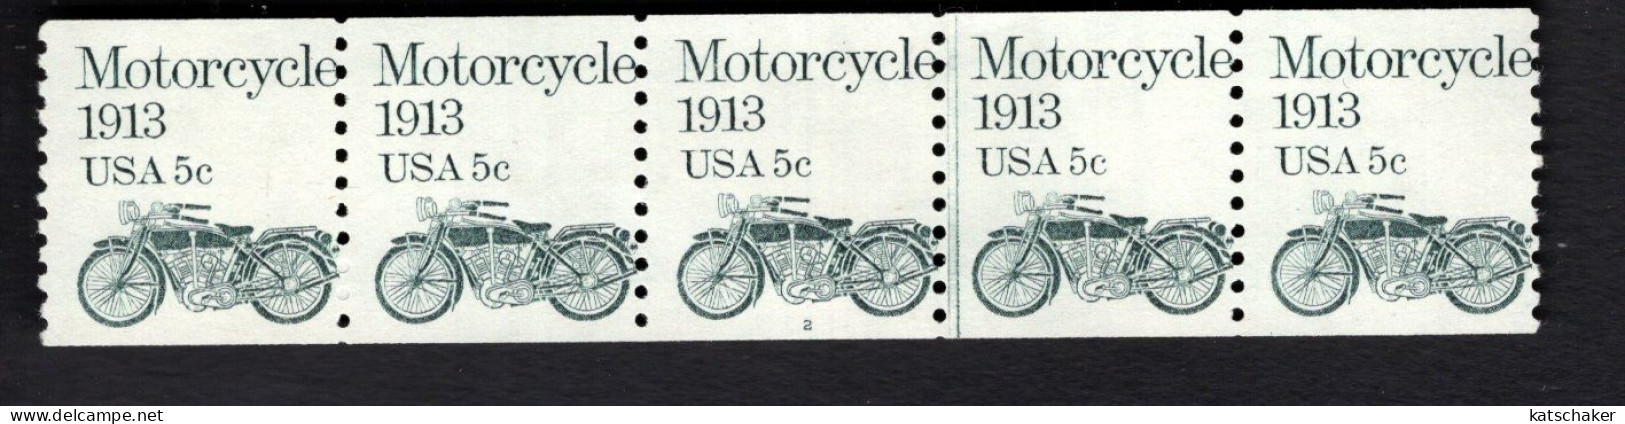 2024582519 1983 SCOTT1899 (XX) POSTFRIS MINT NEVER HINGED - STRIP OF5 MOTORCYCLE AND PLATE NUMBER 2 - Coils (Plate Numbers)